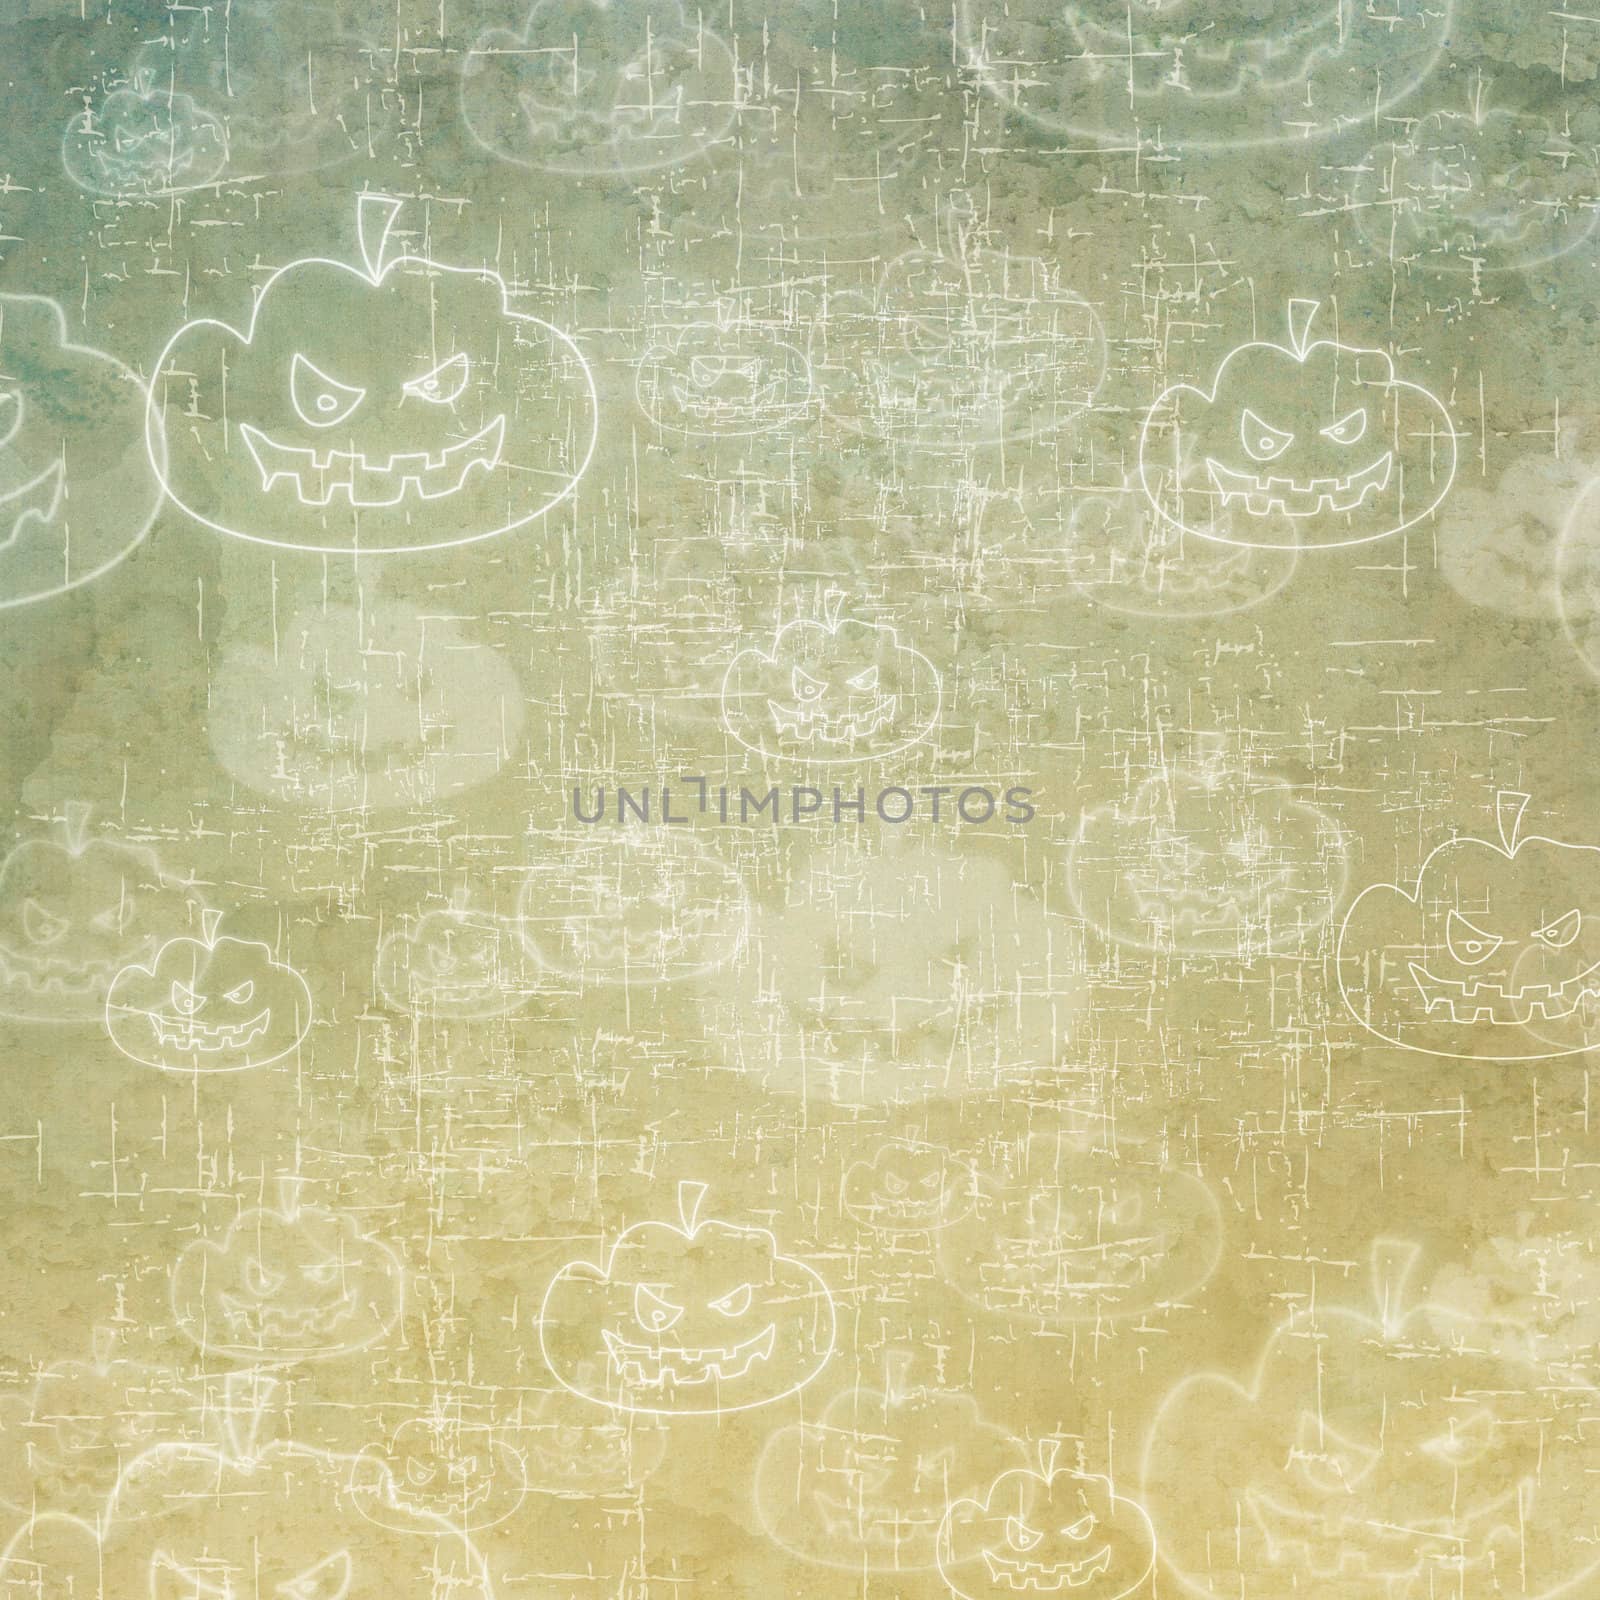 Pumpkin icon on old paper background and pattern